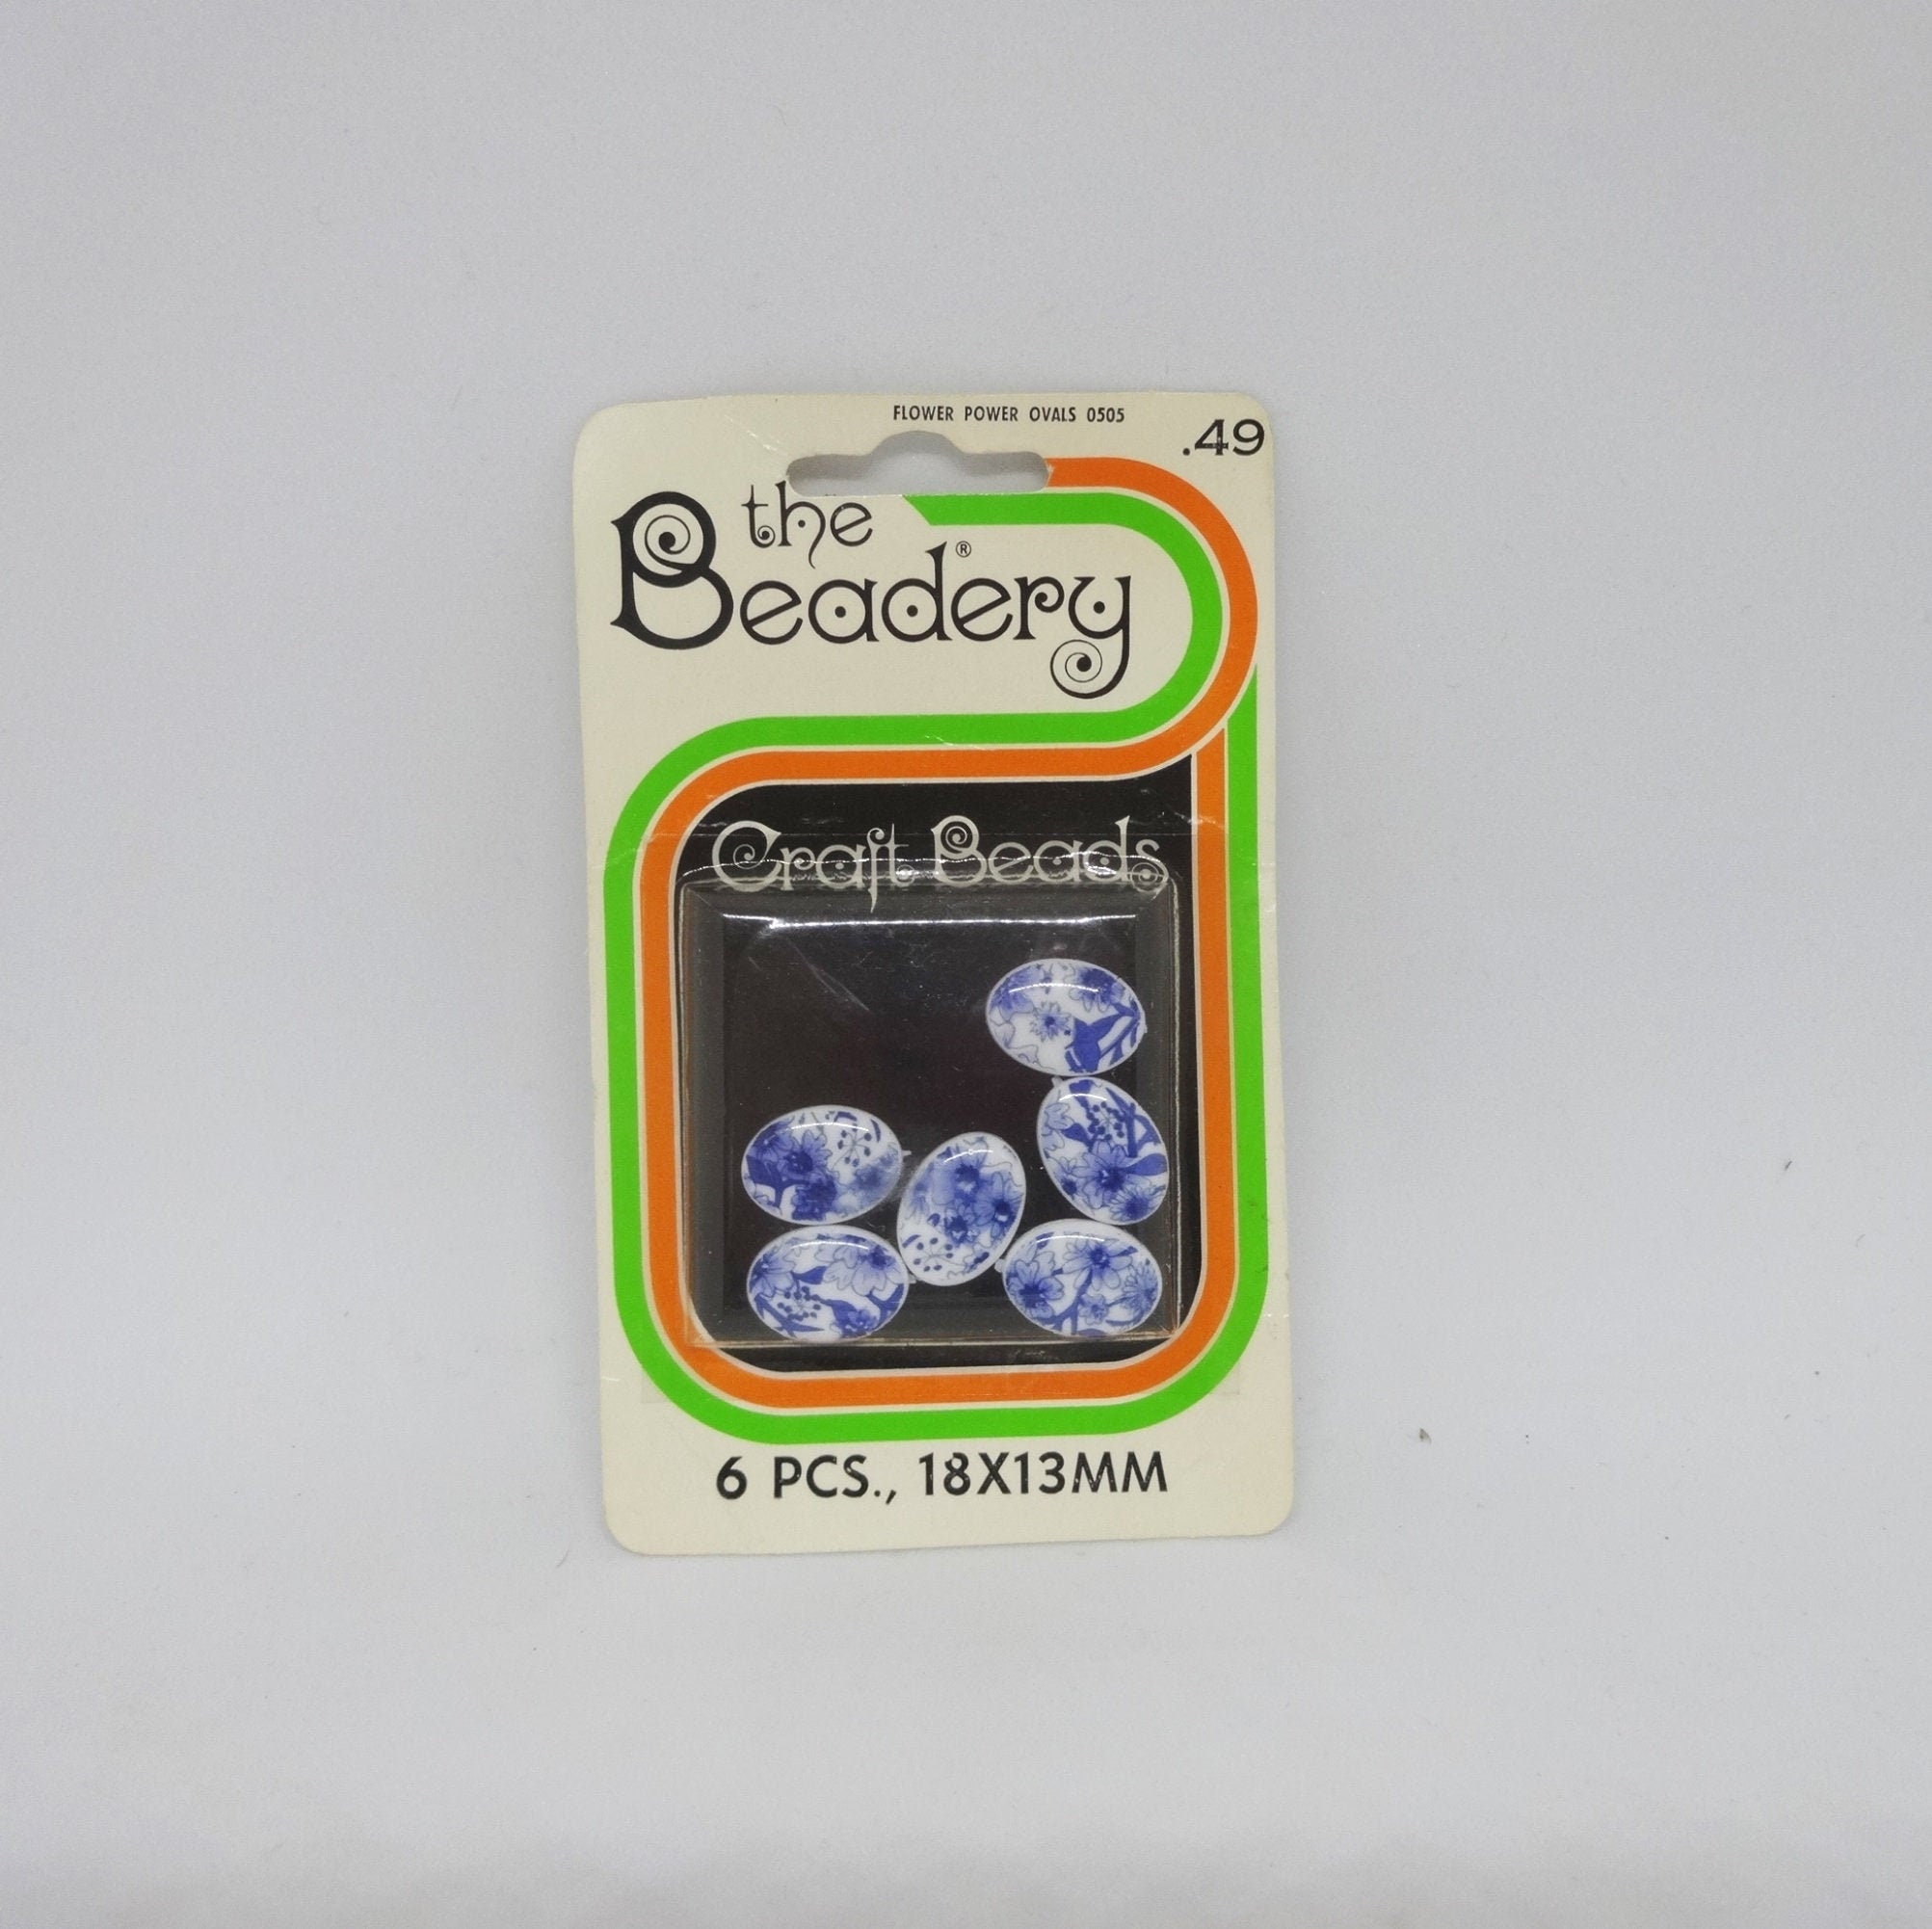 Vintage Craft Beads, New Old Stock, the Beadery, Made in the U.S.A. 